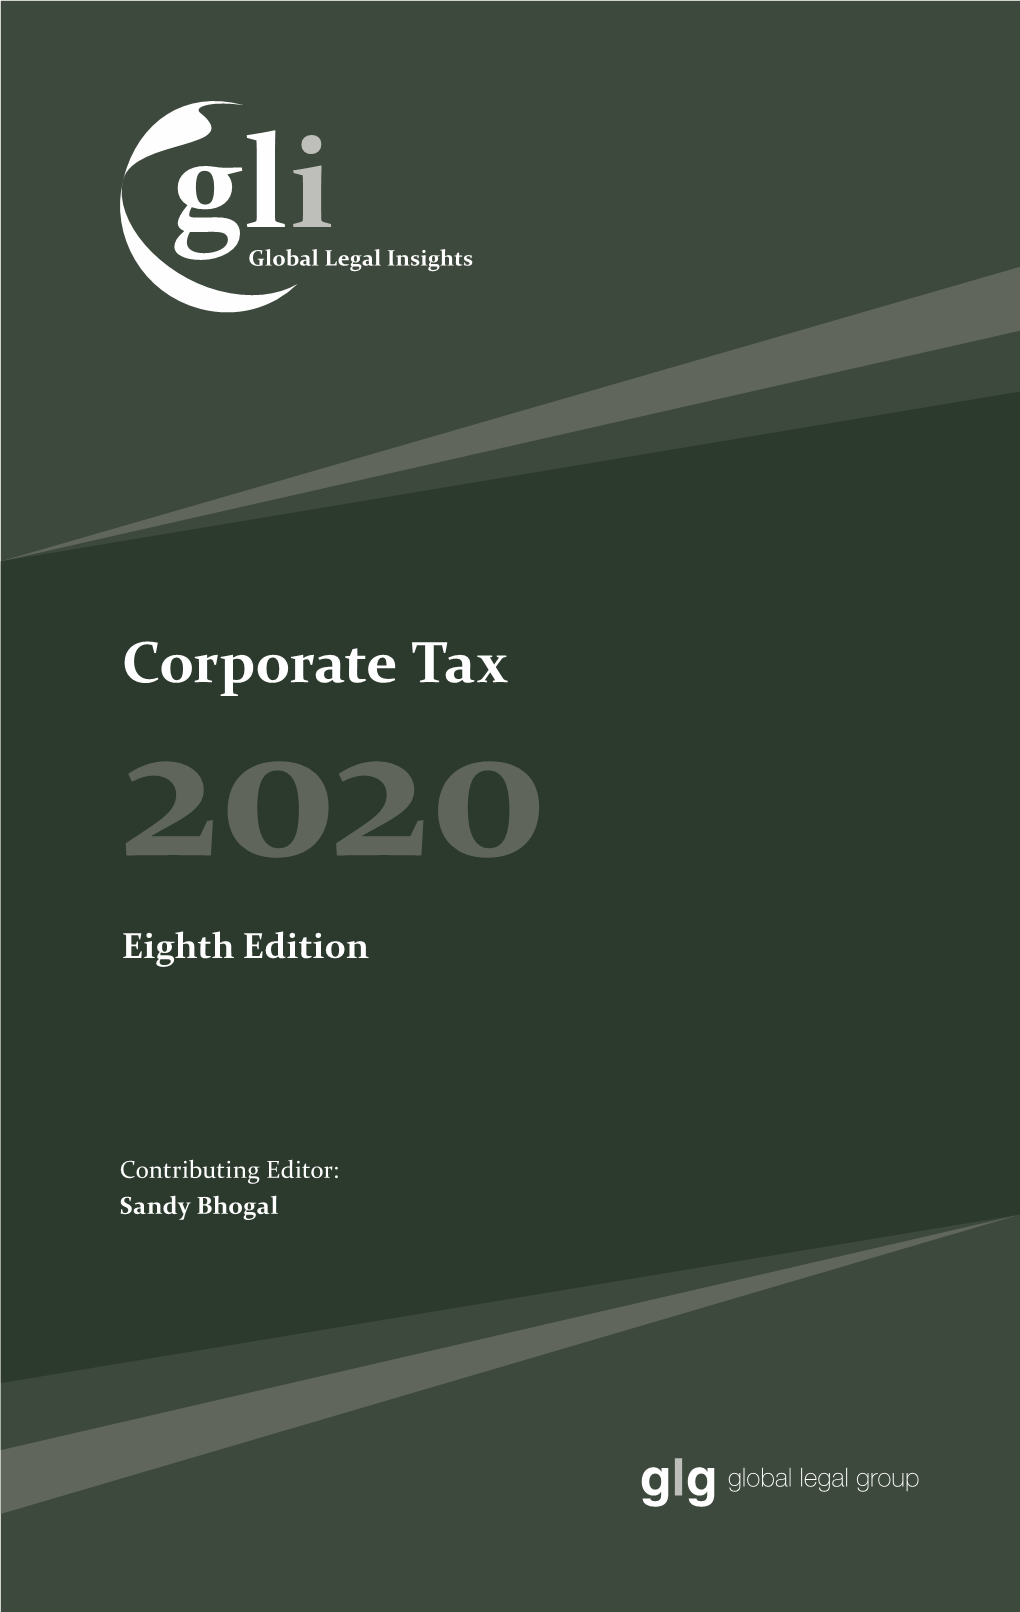 Corporate Tax 2020 Eighth Edition